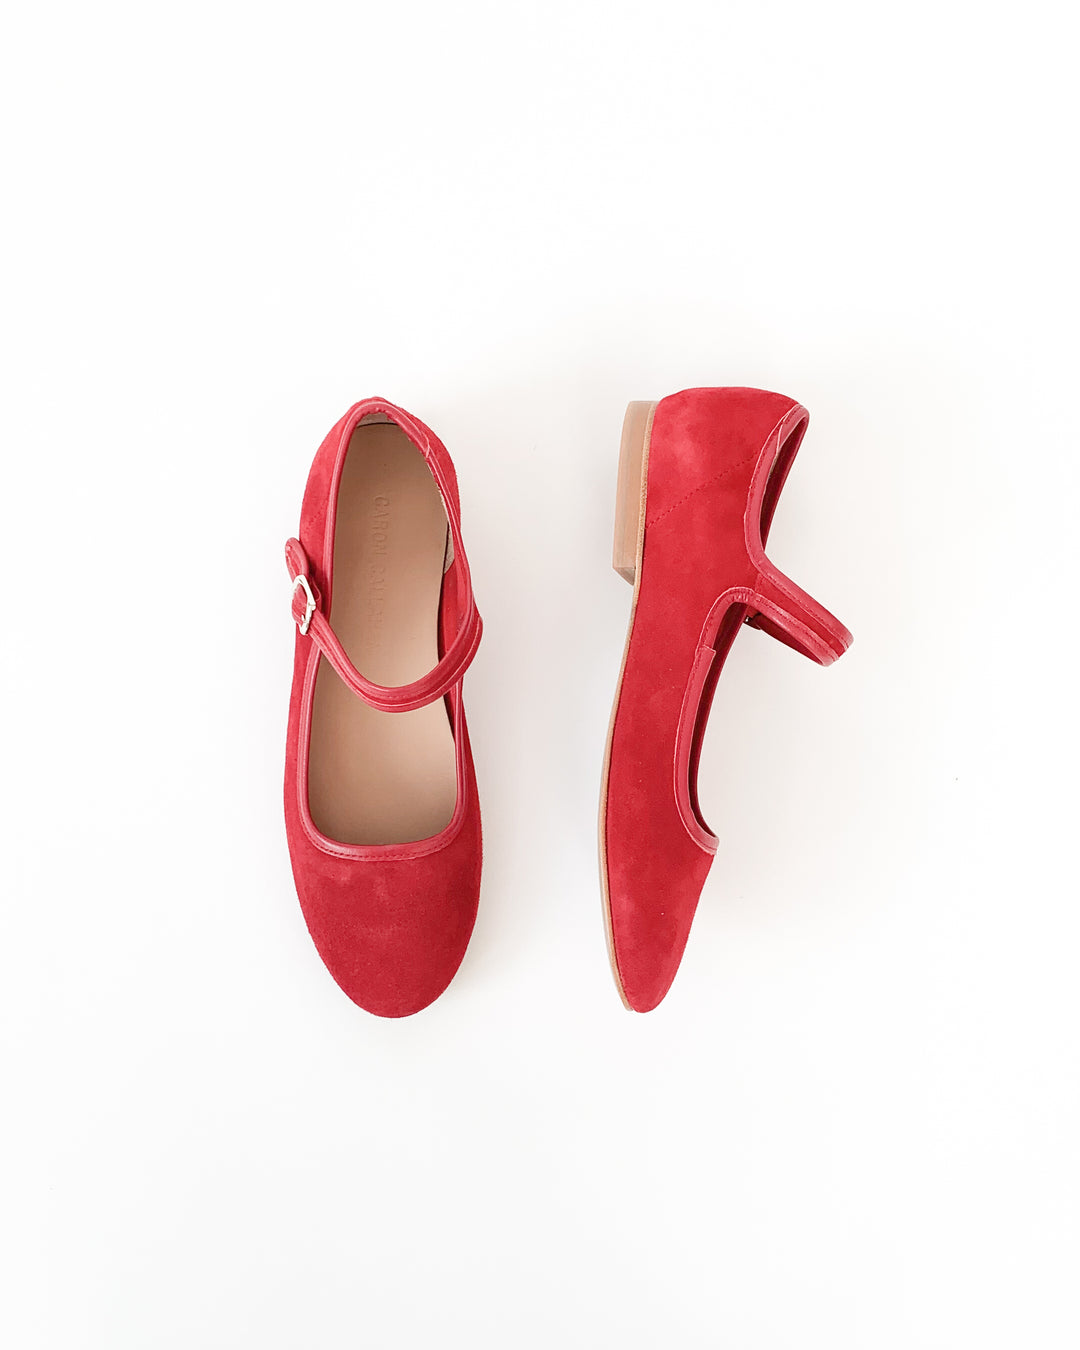 red suede mary jane shoes